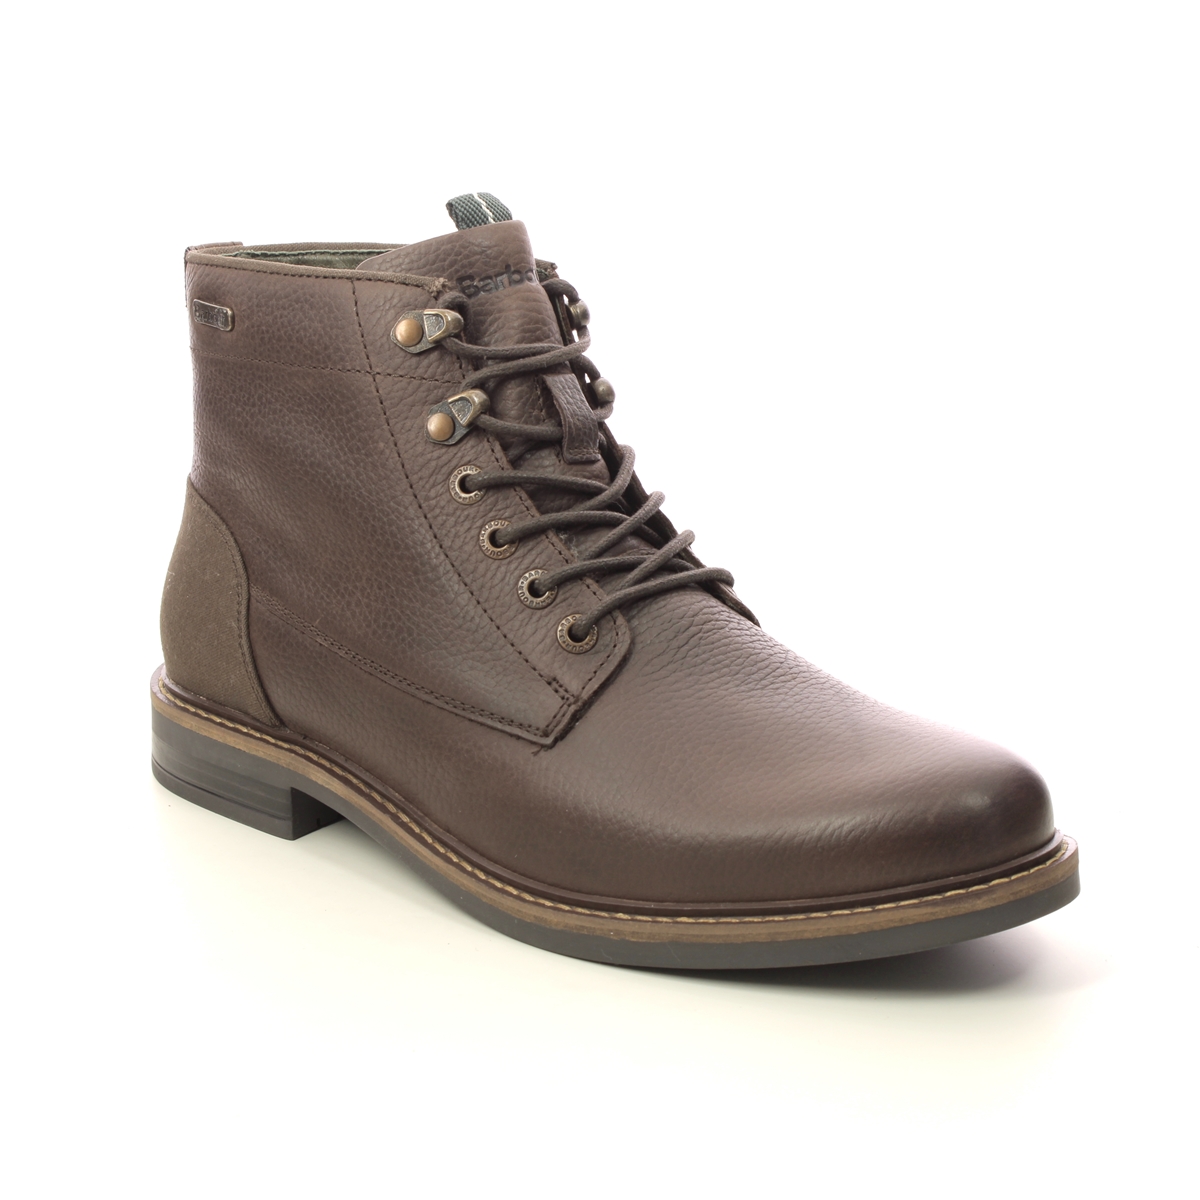 Barbour Deckham Derby Brown Leather Boots Mfo0644-Br77 In Size 7 In Plain Brown Leather